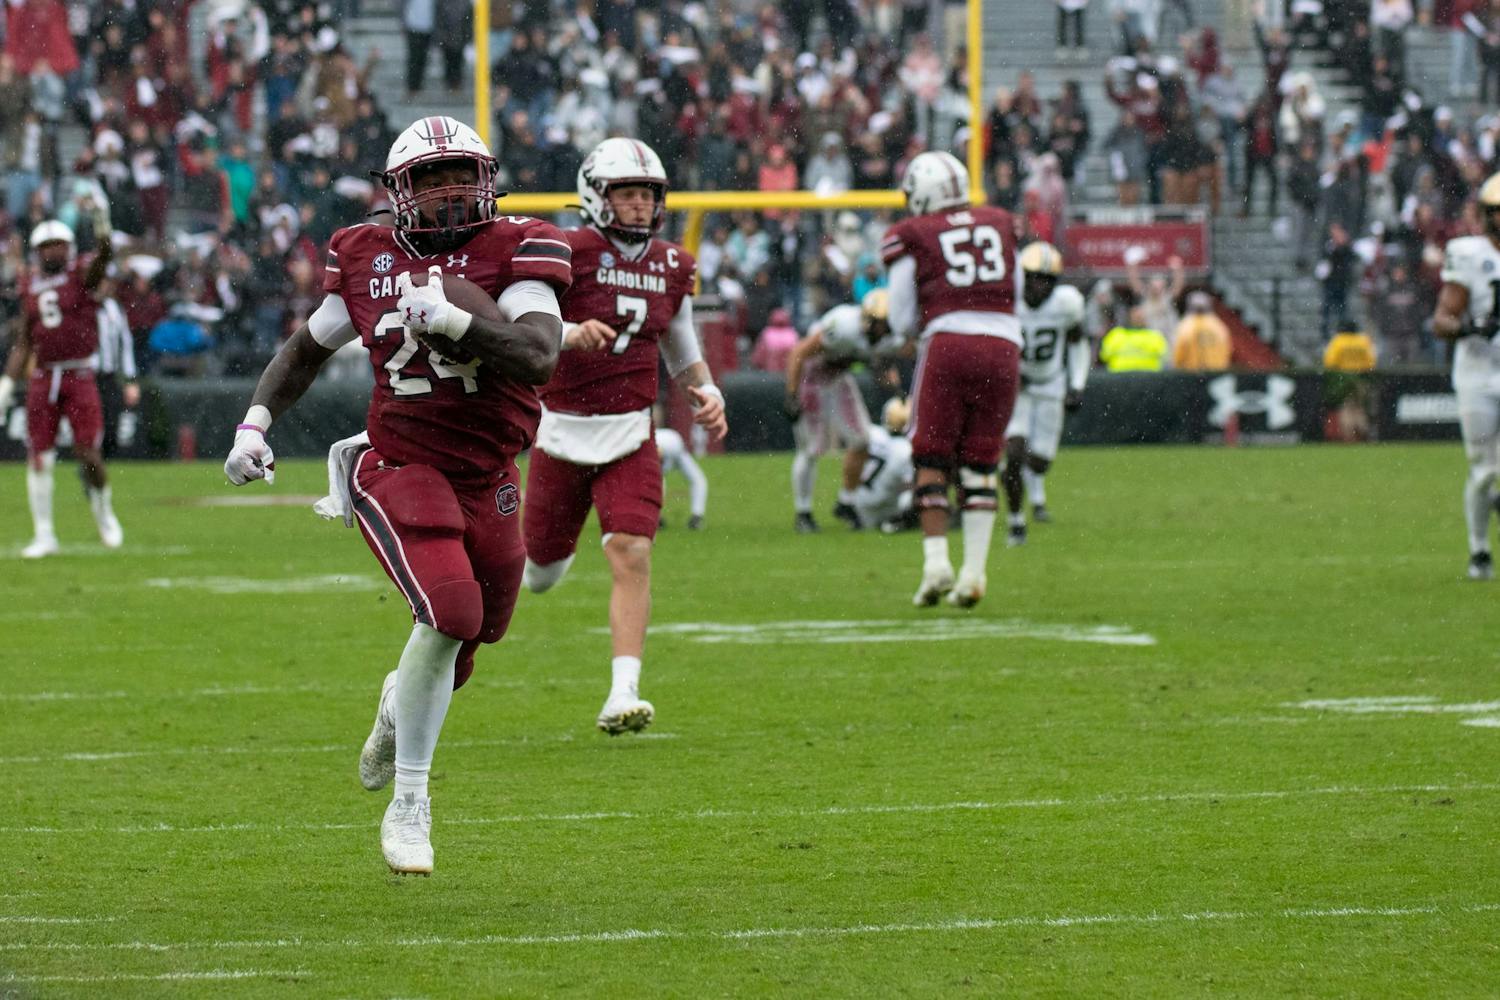 The South Carolina Gamecocks faced the Vanderbilt Commodores at Williams-Brice Stadium on Nov. 11, 2023. The Gamecocks commanded a 47-6 victory, putting the team at 4-6 on the season. The Gamecocks totaled 487 yards to the Commodores' 234.